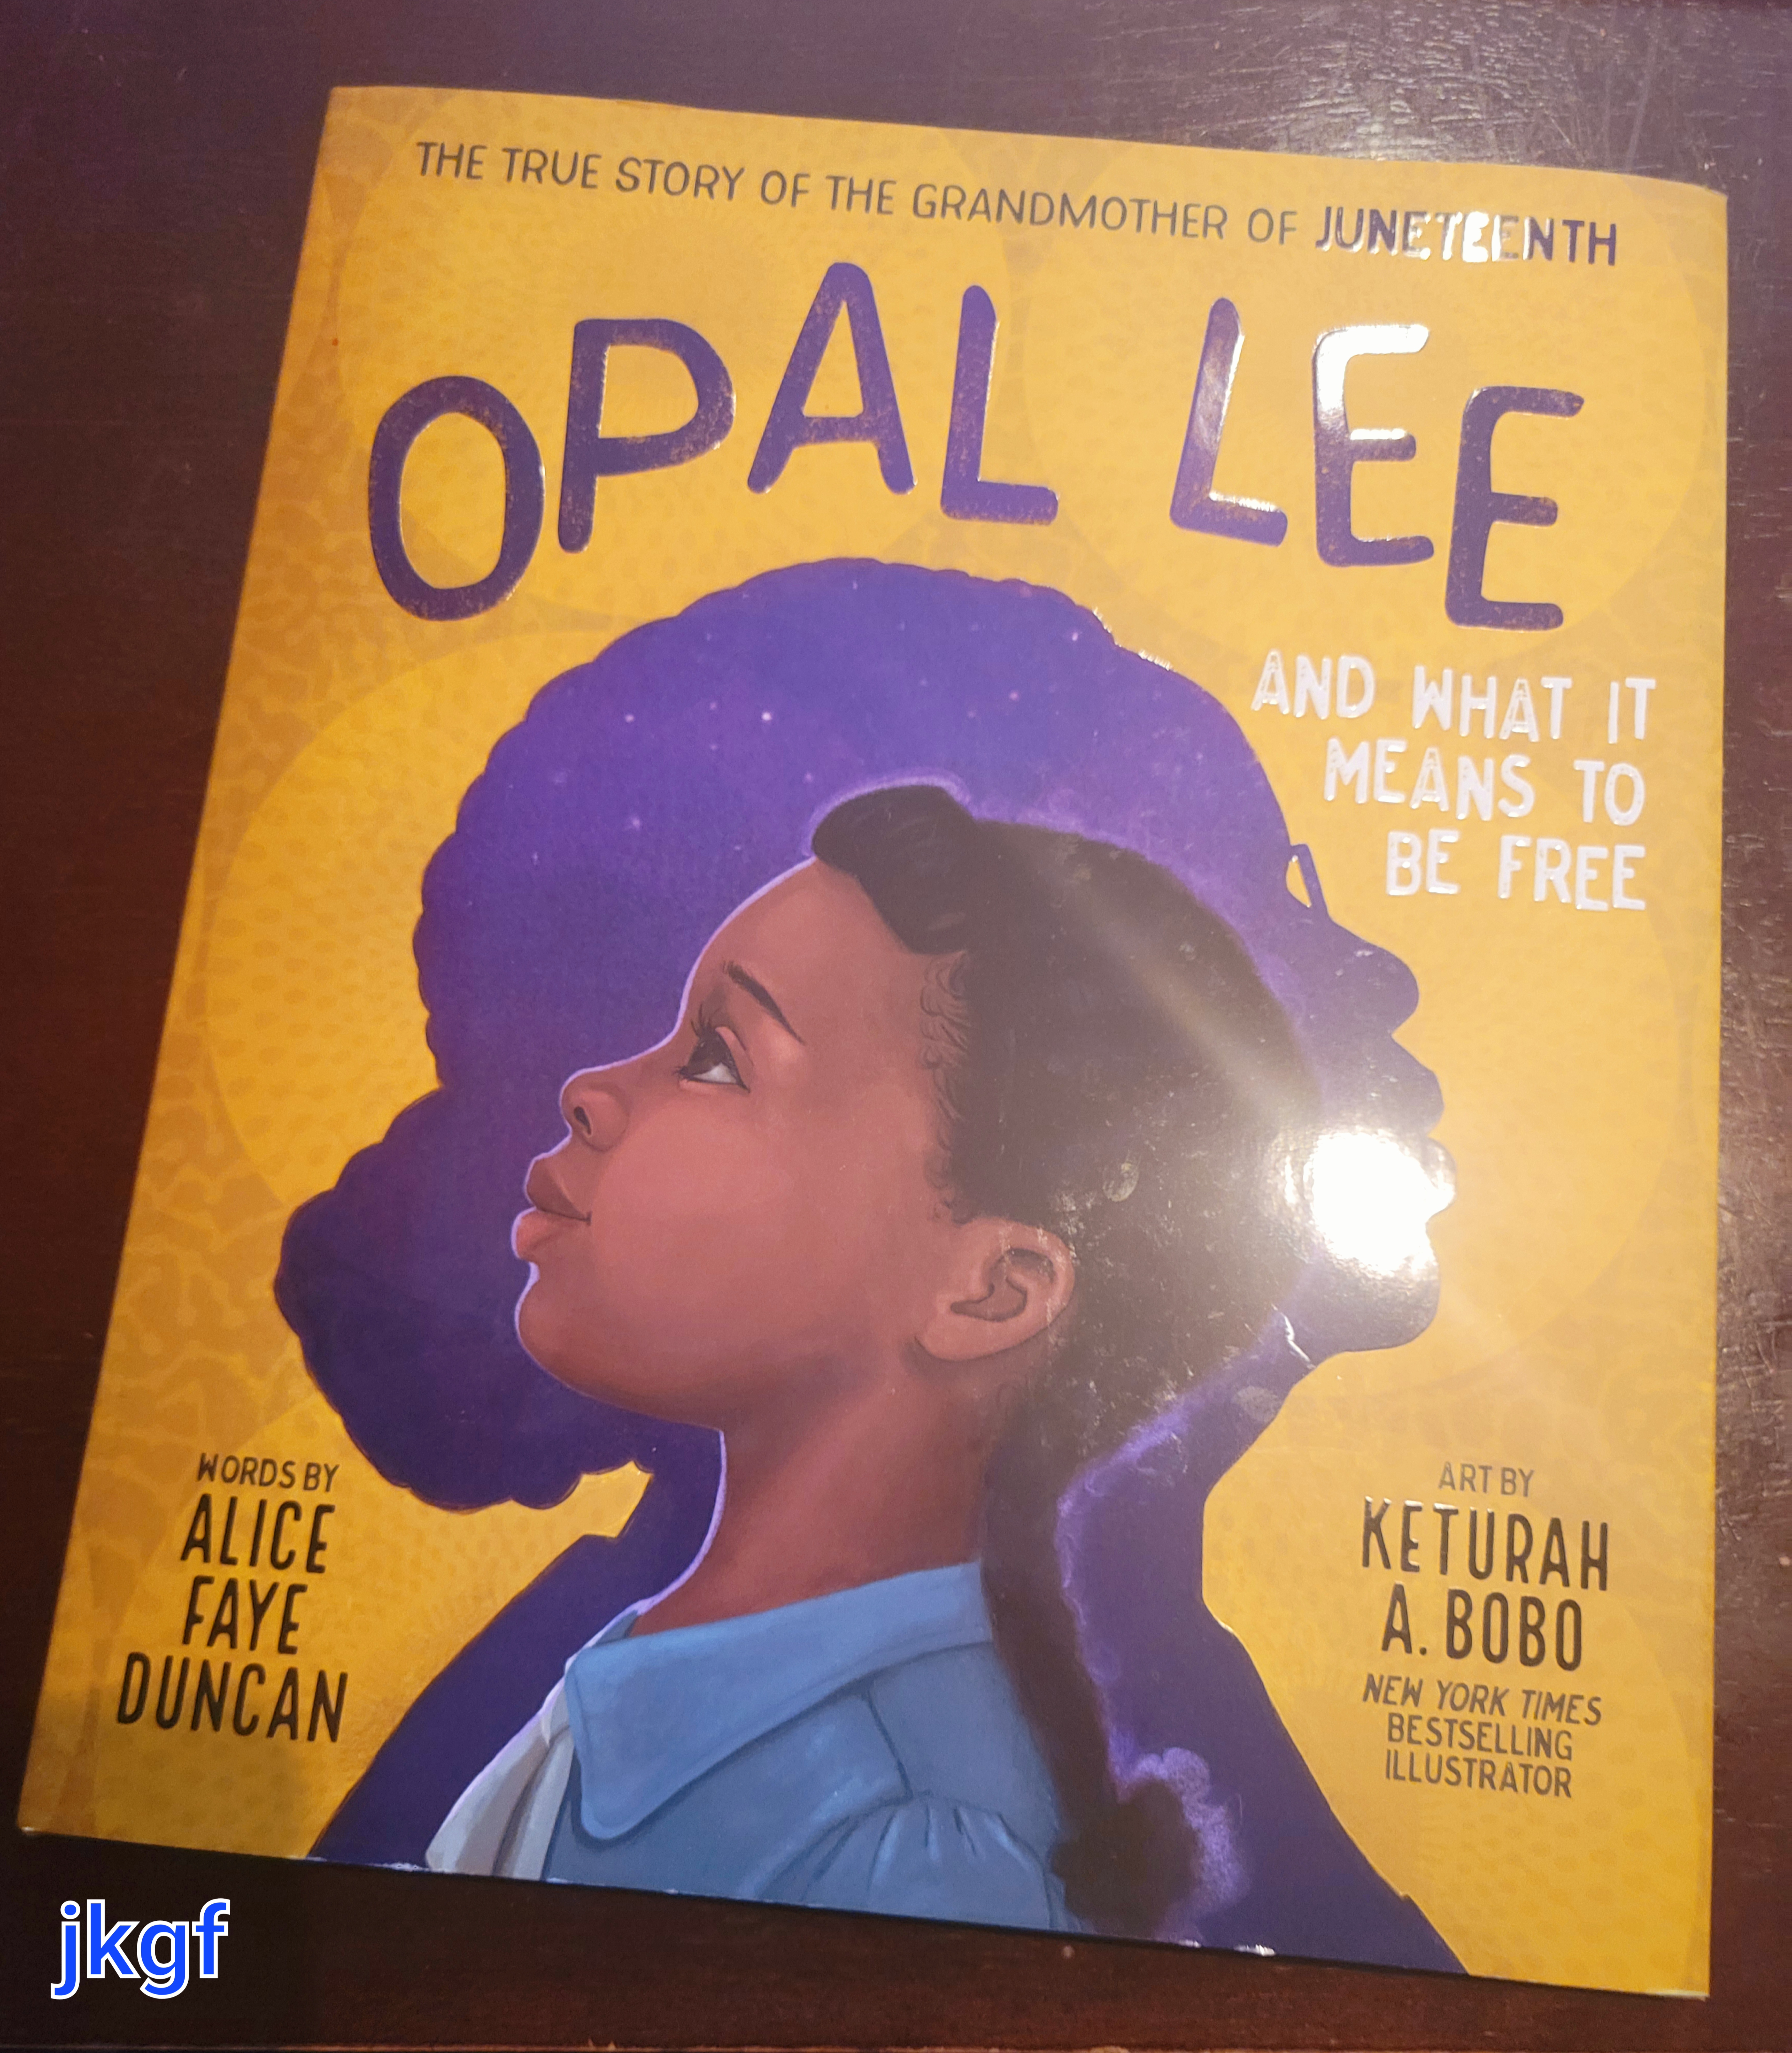 JKGF Book Club: Opal Lee and What It Means to Be Free